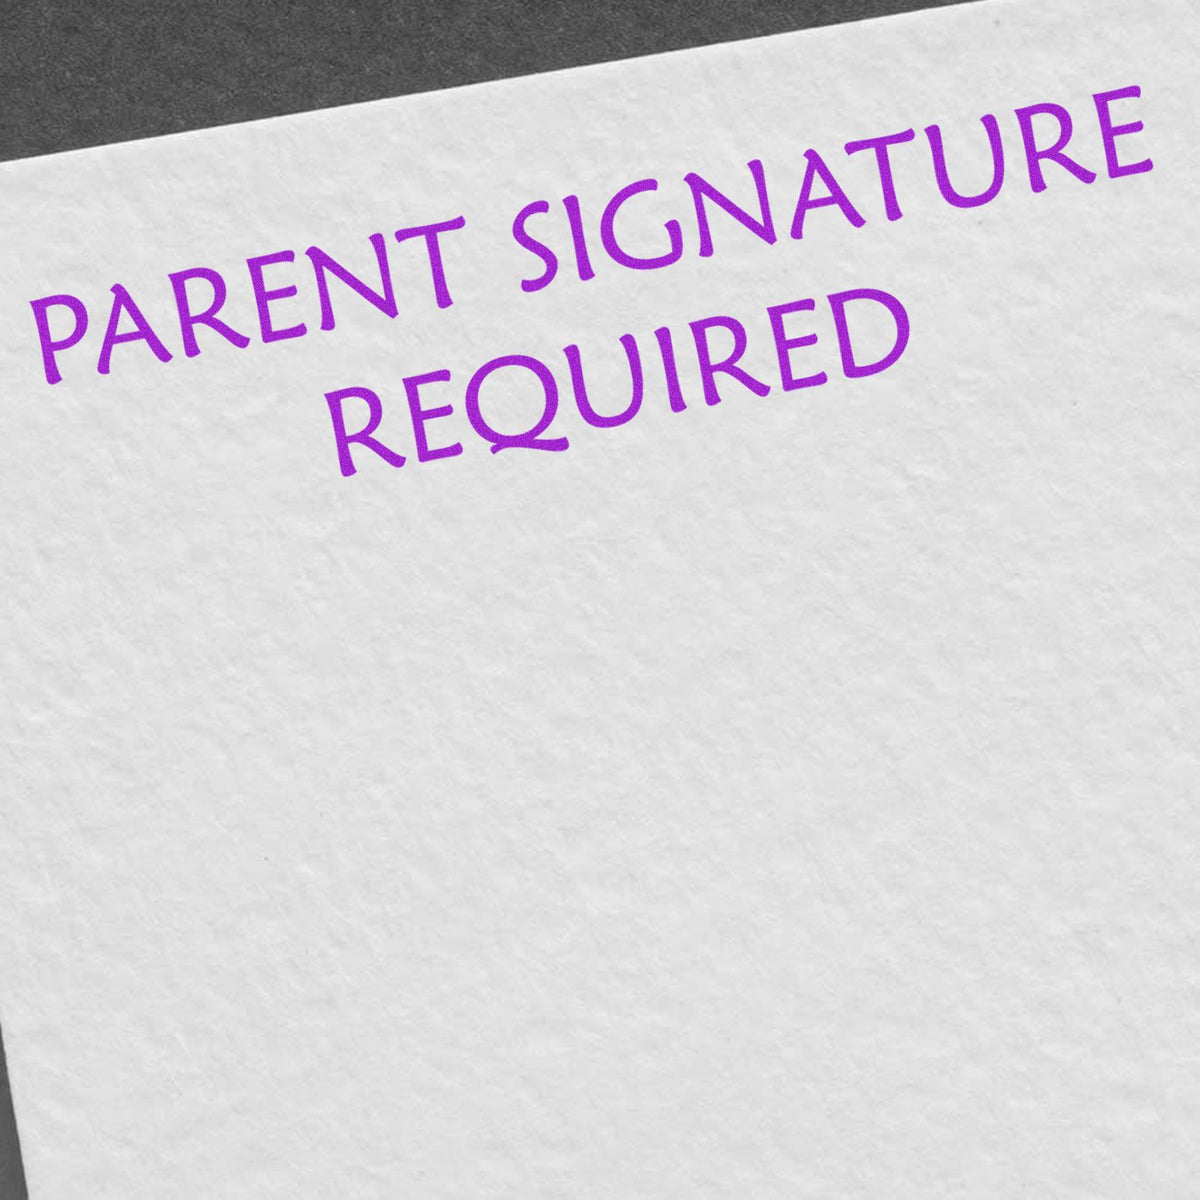 Large Parent Signature Required Rubber Stamp In Use